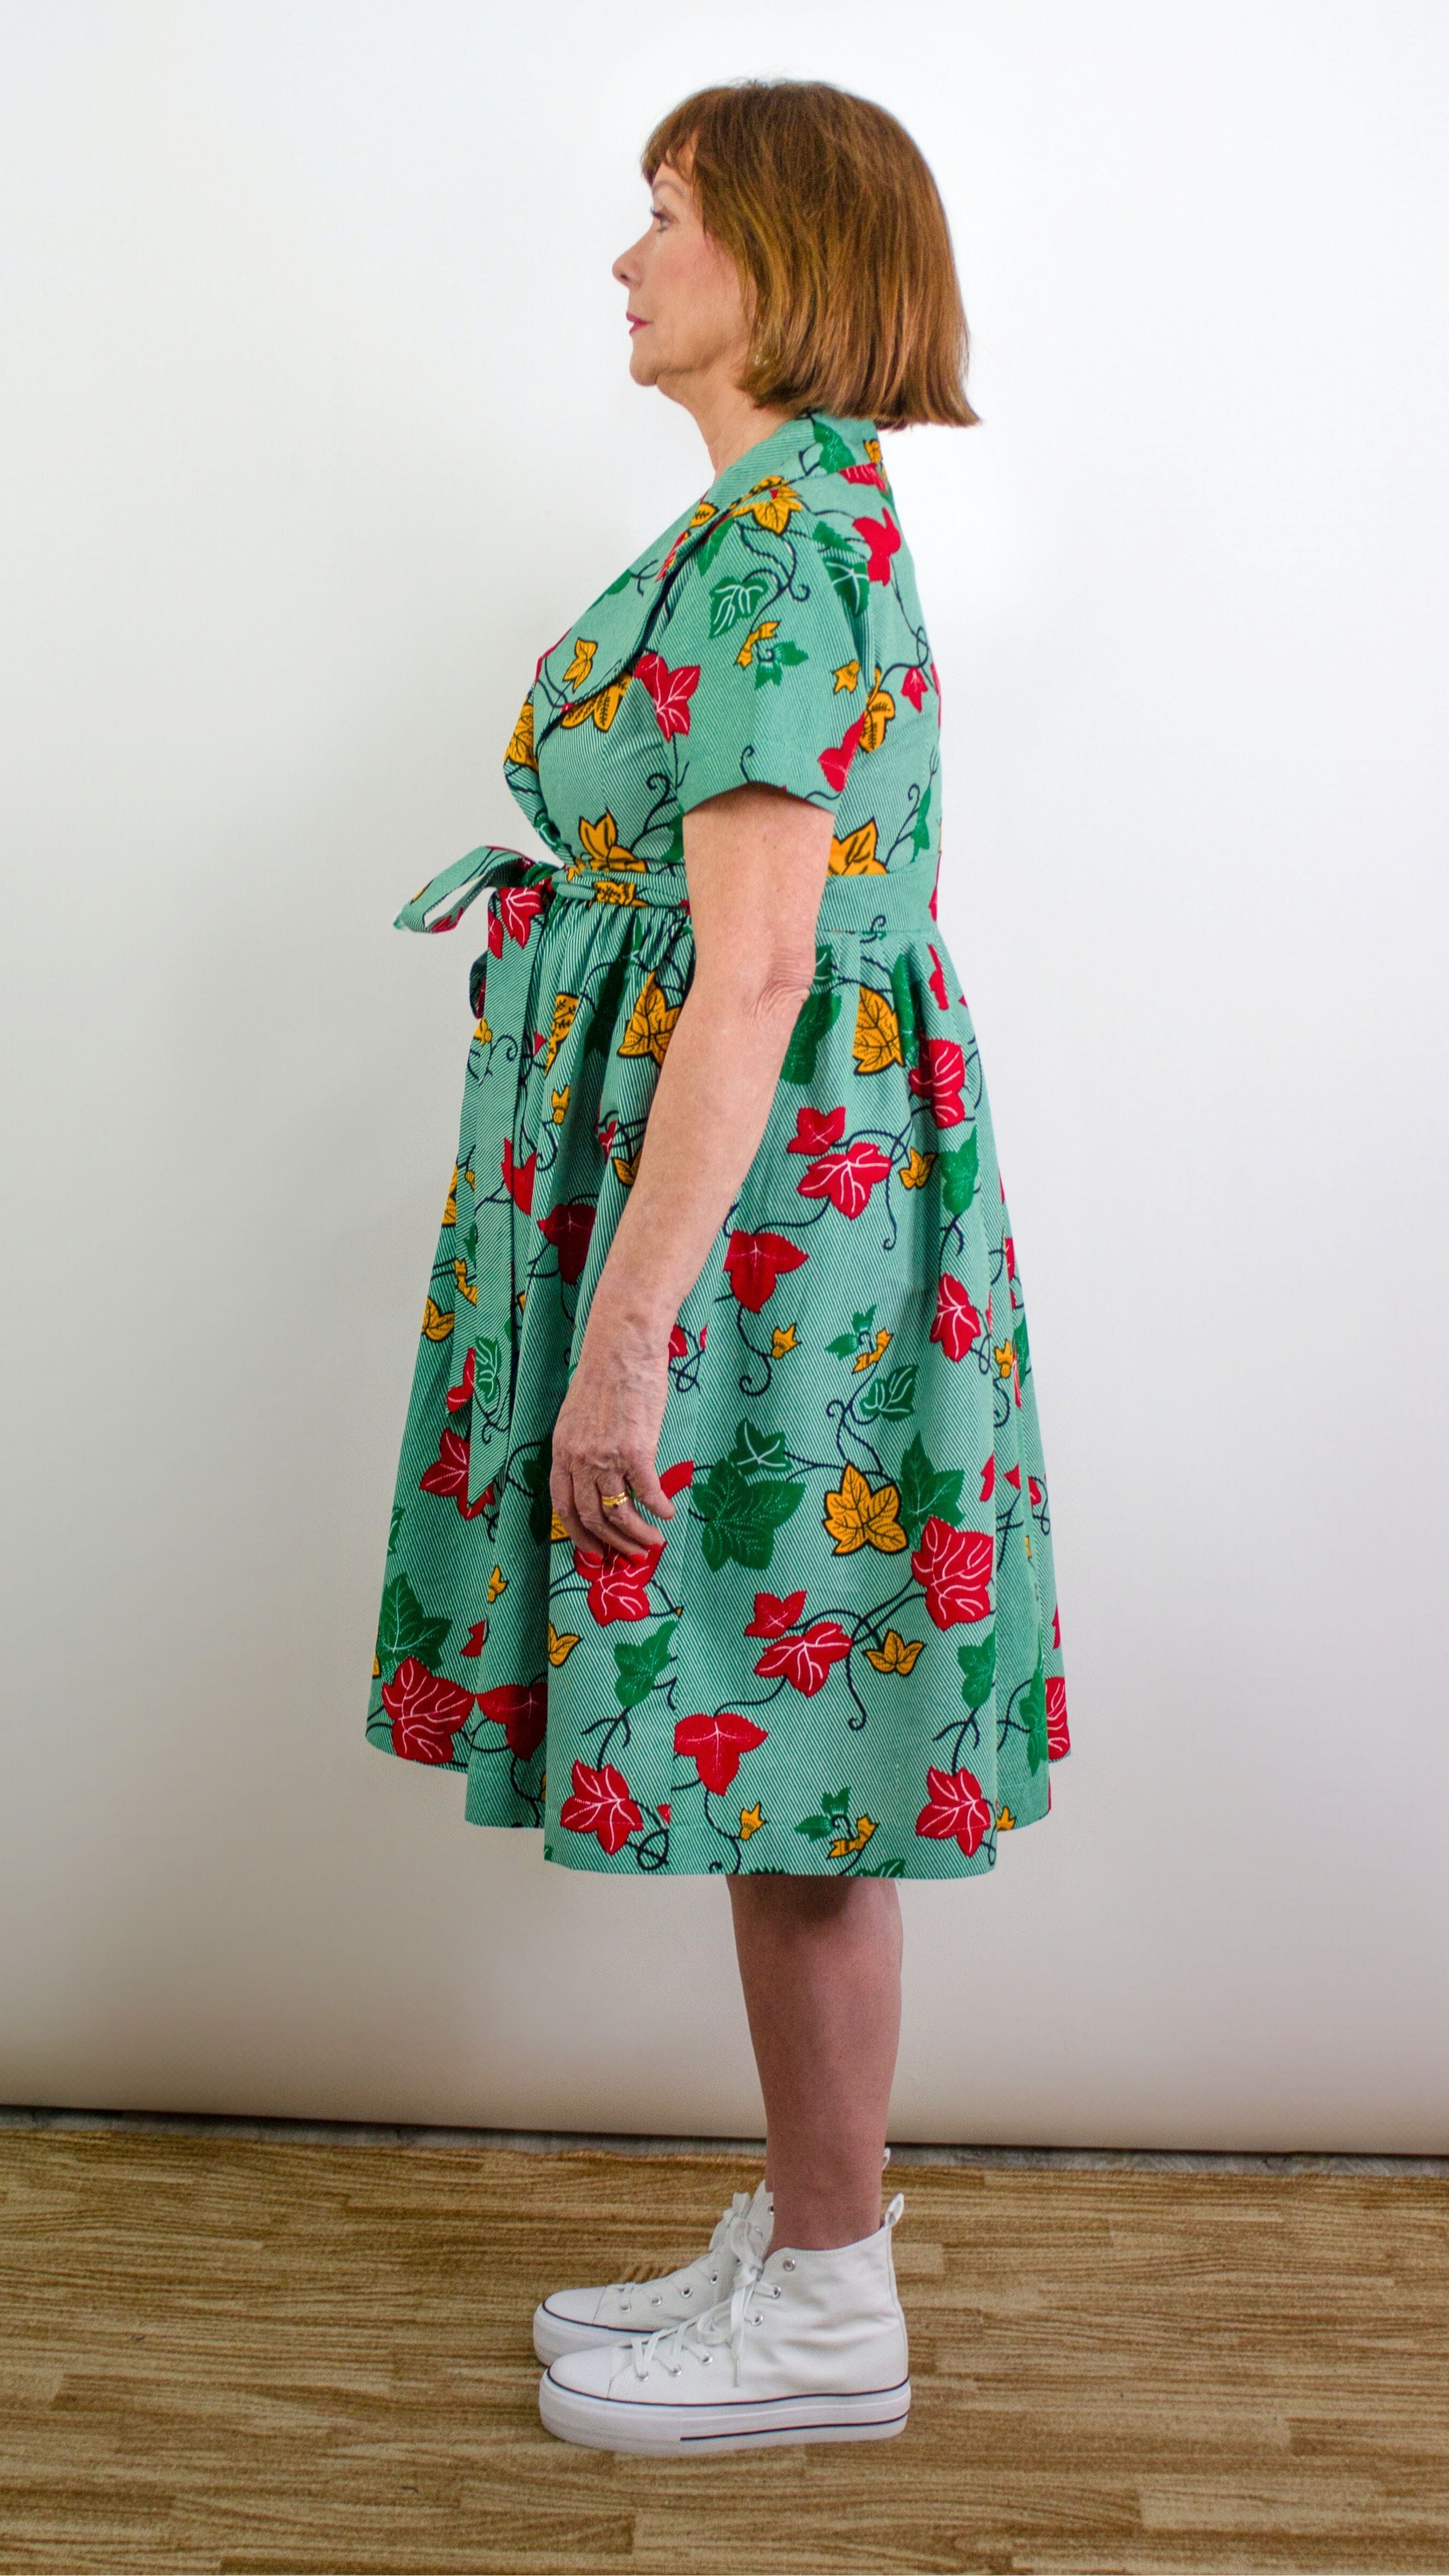 A side view of a model posing in a knee-length green print dress with leaf elements, highlighting the tie belt, adding a stylish accent to the ensemble and accentuating the natural flow of the dress.